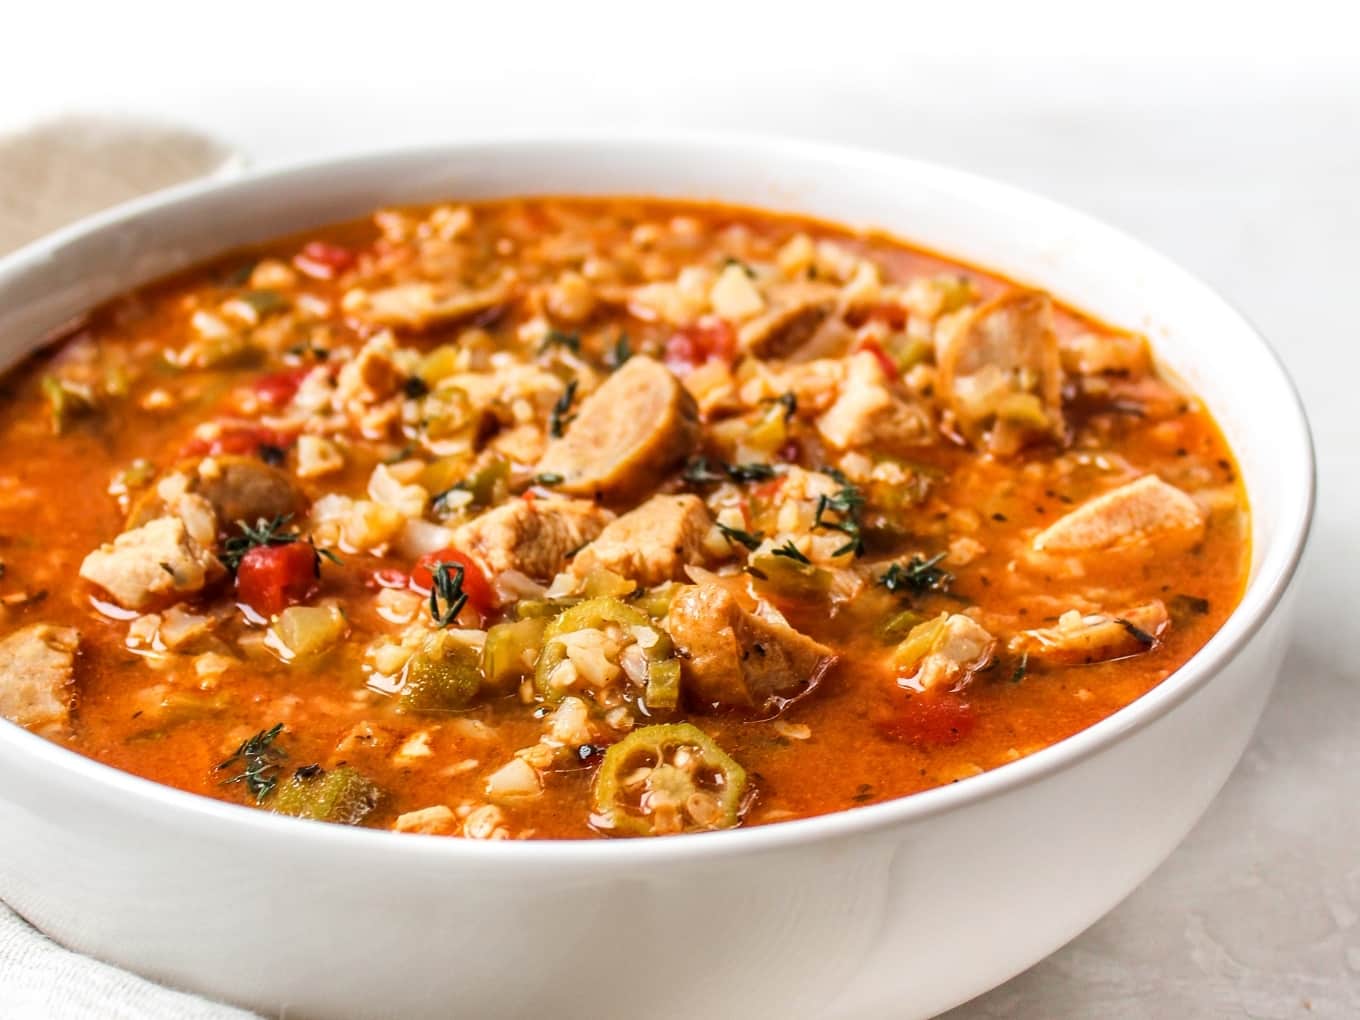 https://thewholecook.com/wp-content/uploads/2020/10/Chicken-Sausage-Gumbo-Soup-by-The-Whole-Cook-horizontal.jpg